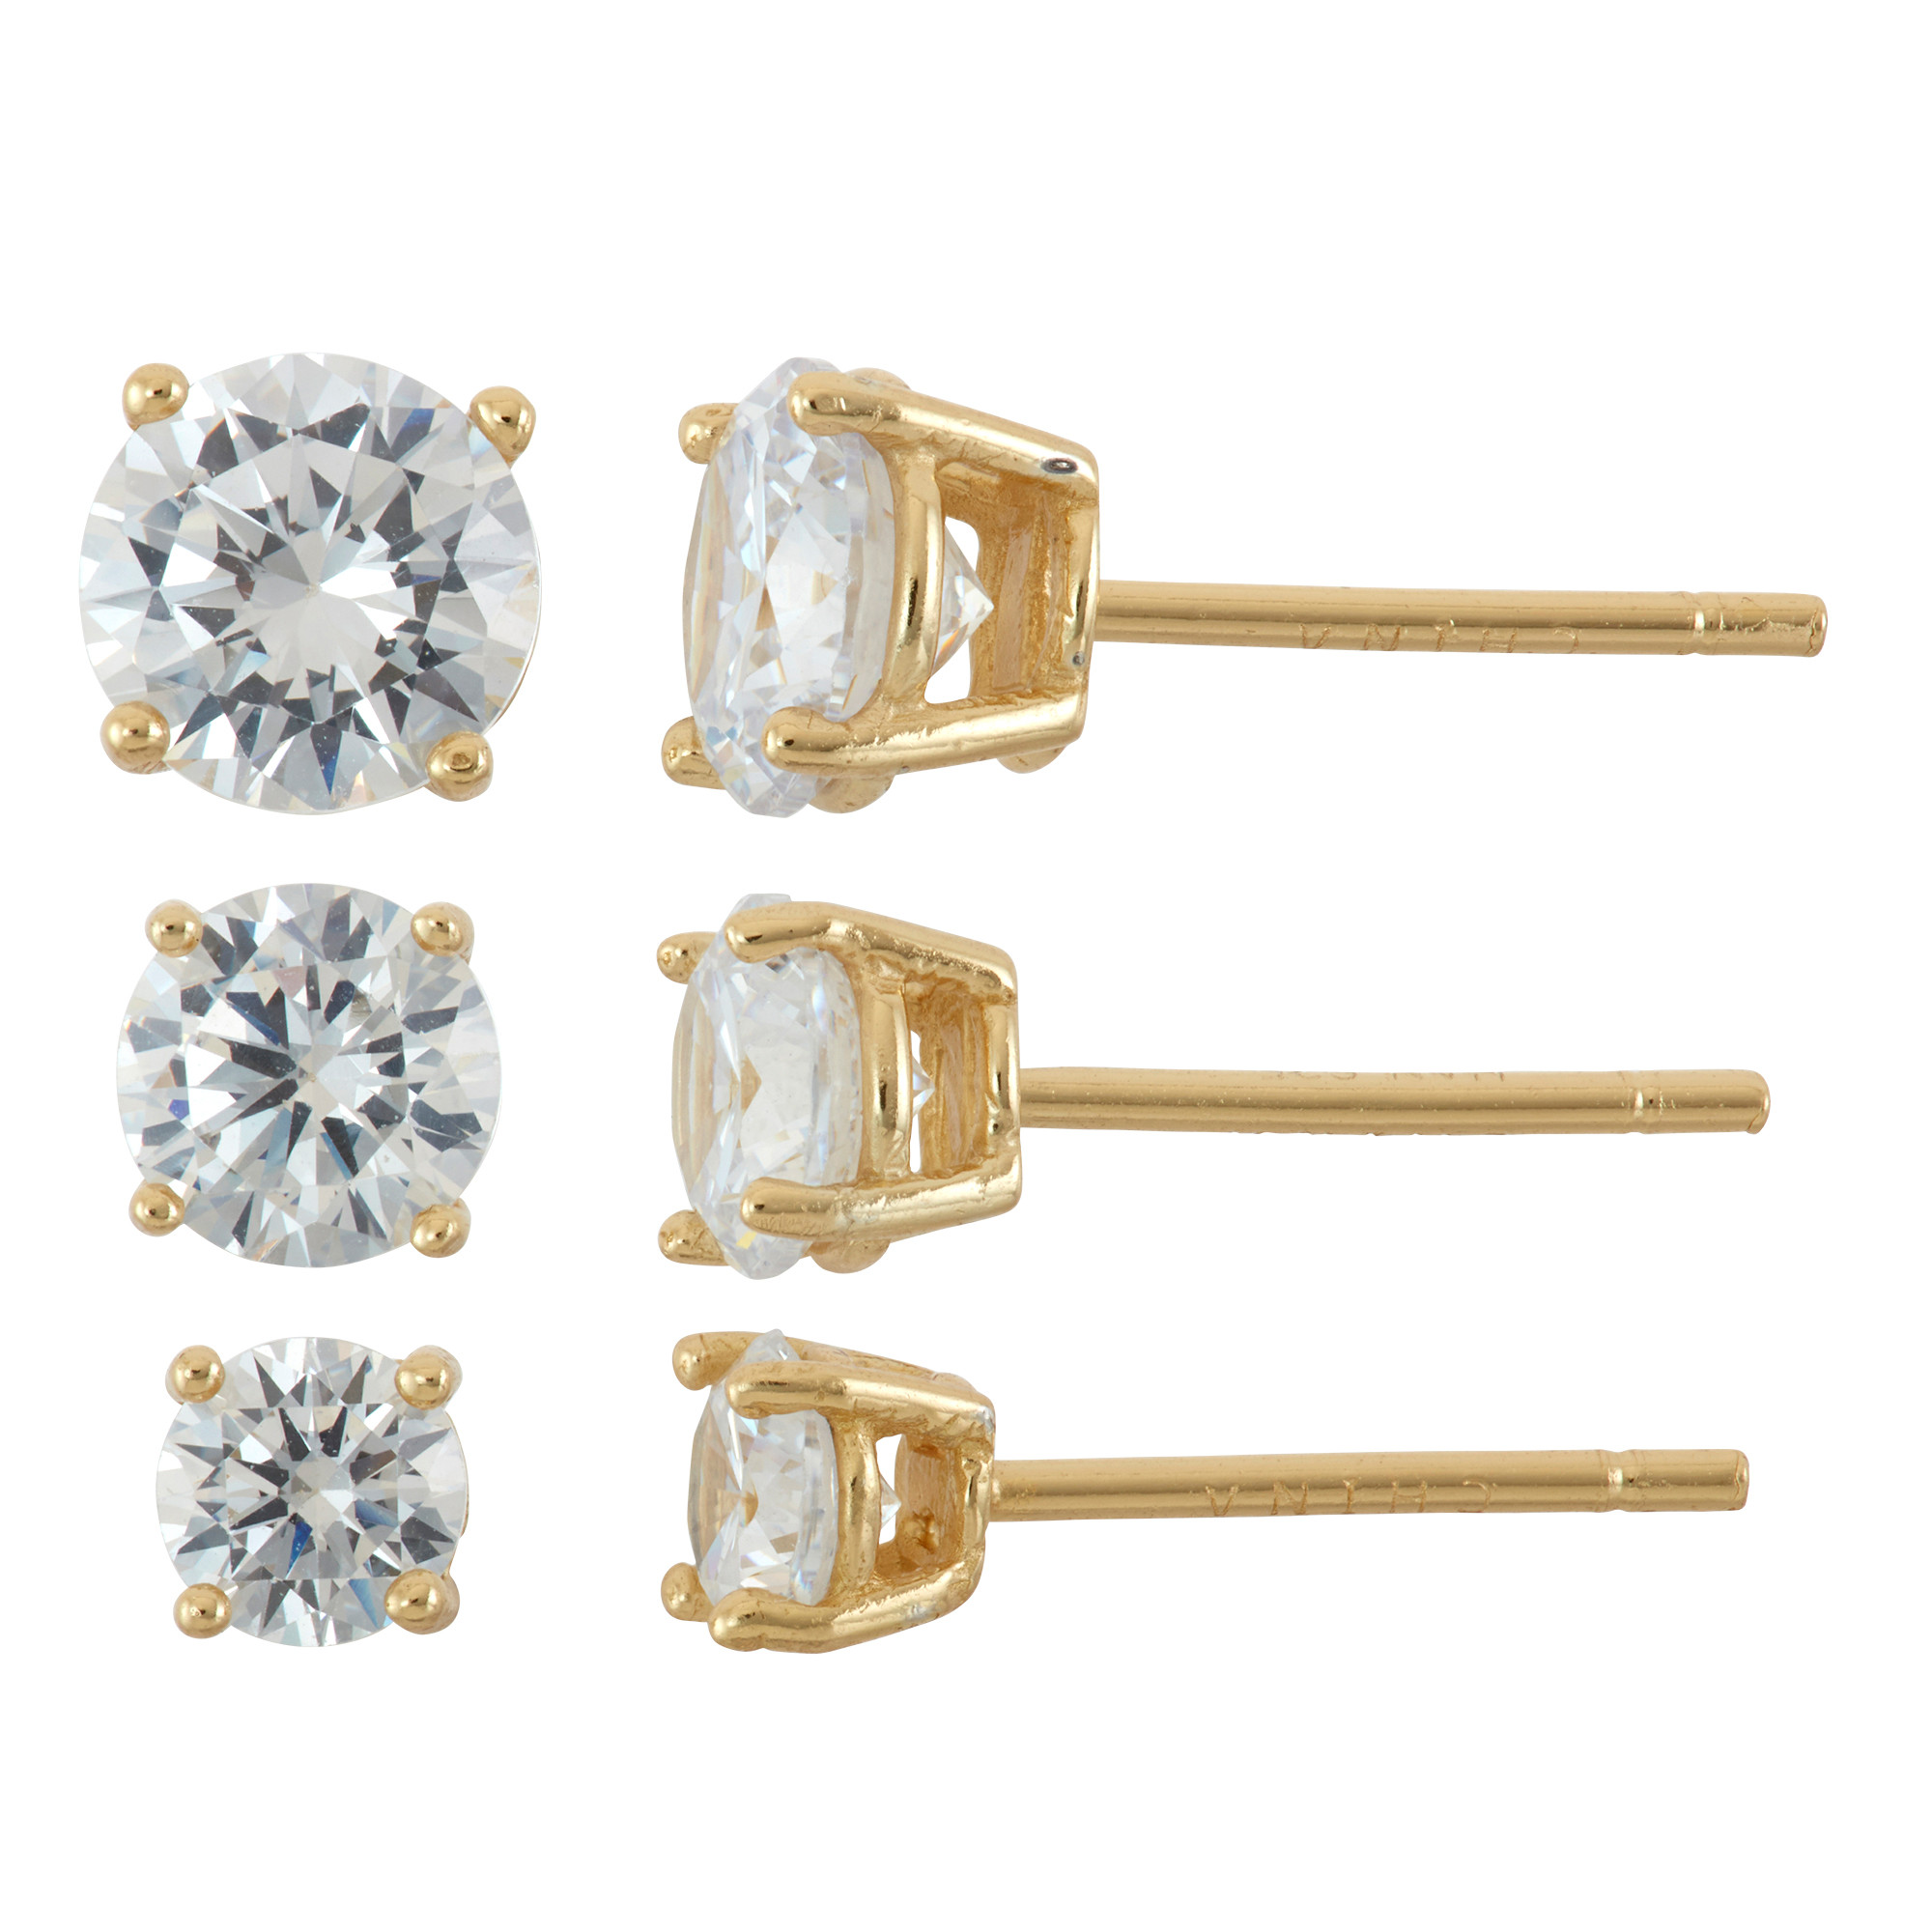 Sterling Silver Stud Earrings Set
 Gold Over Sterling Silver 3 Pair Round Cubic Zirconia Stud